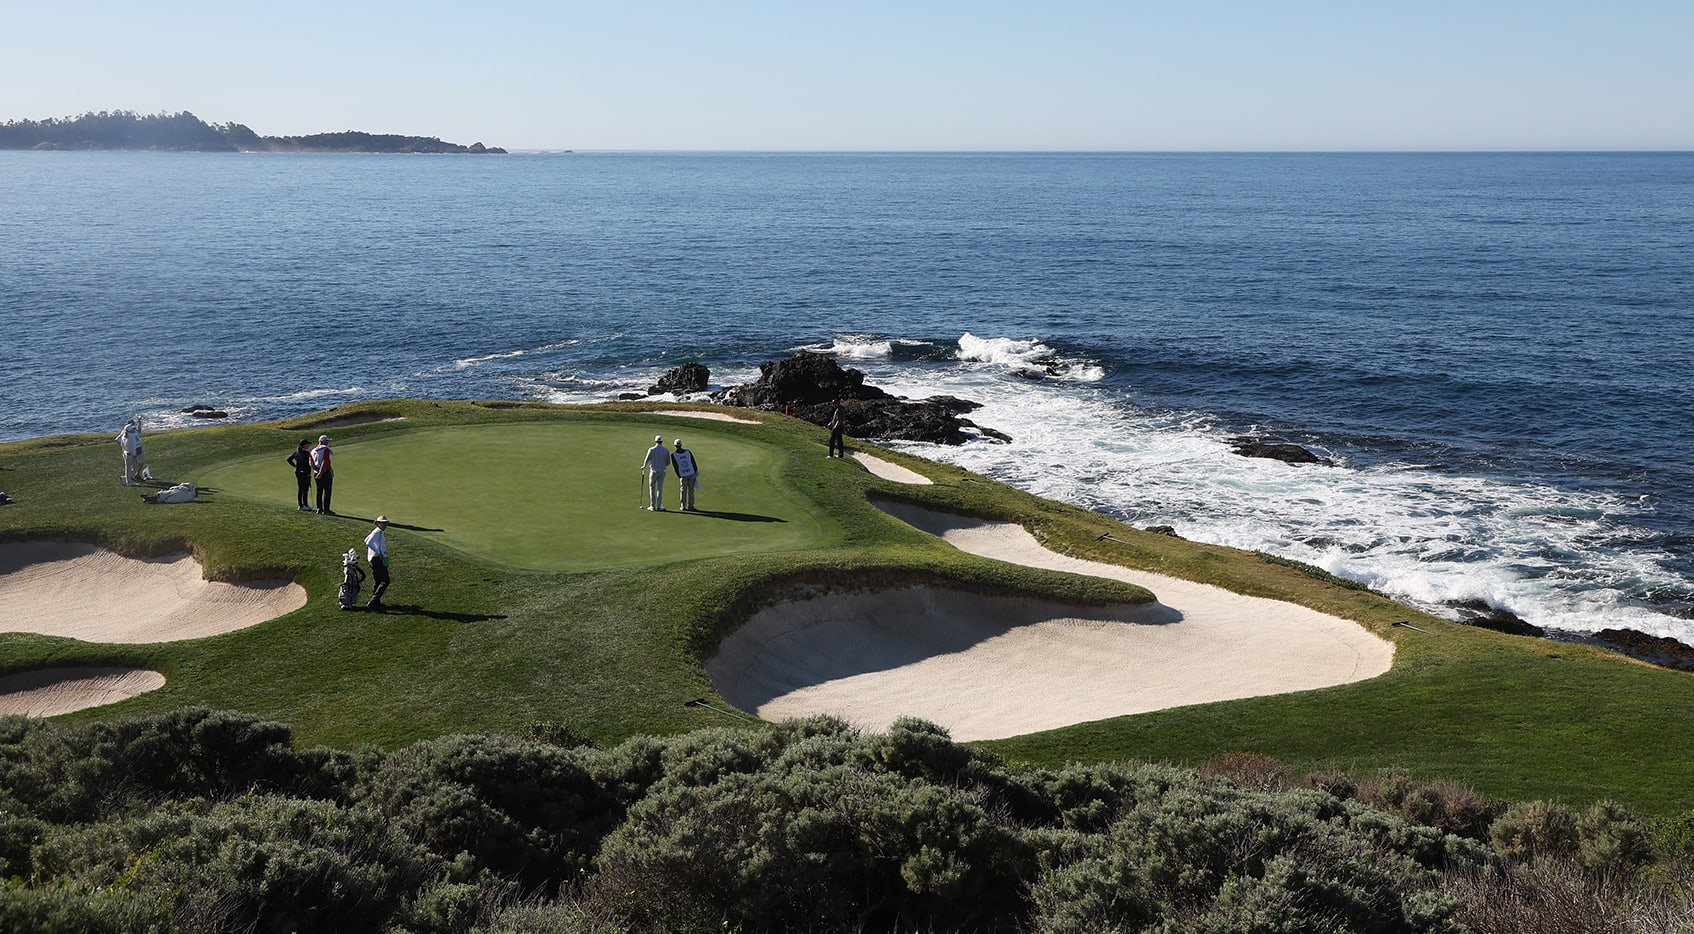 How to watch ATandT Pebble Beach Pro-Am, Round 4 Featured Groups, live scores, tee times, TV times